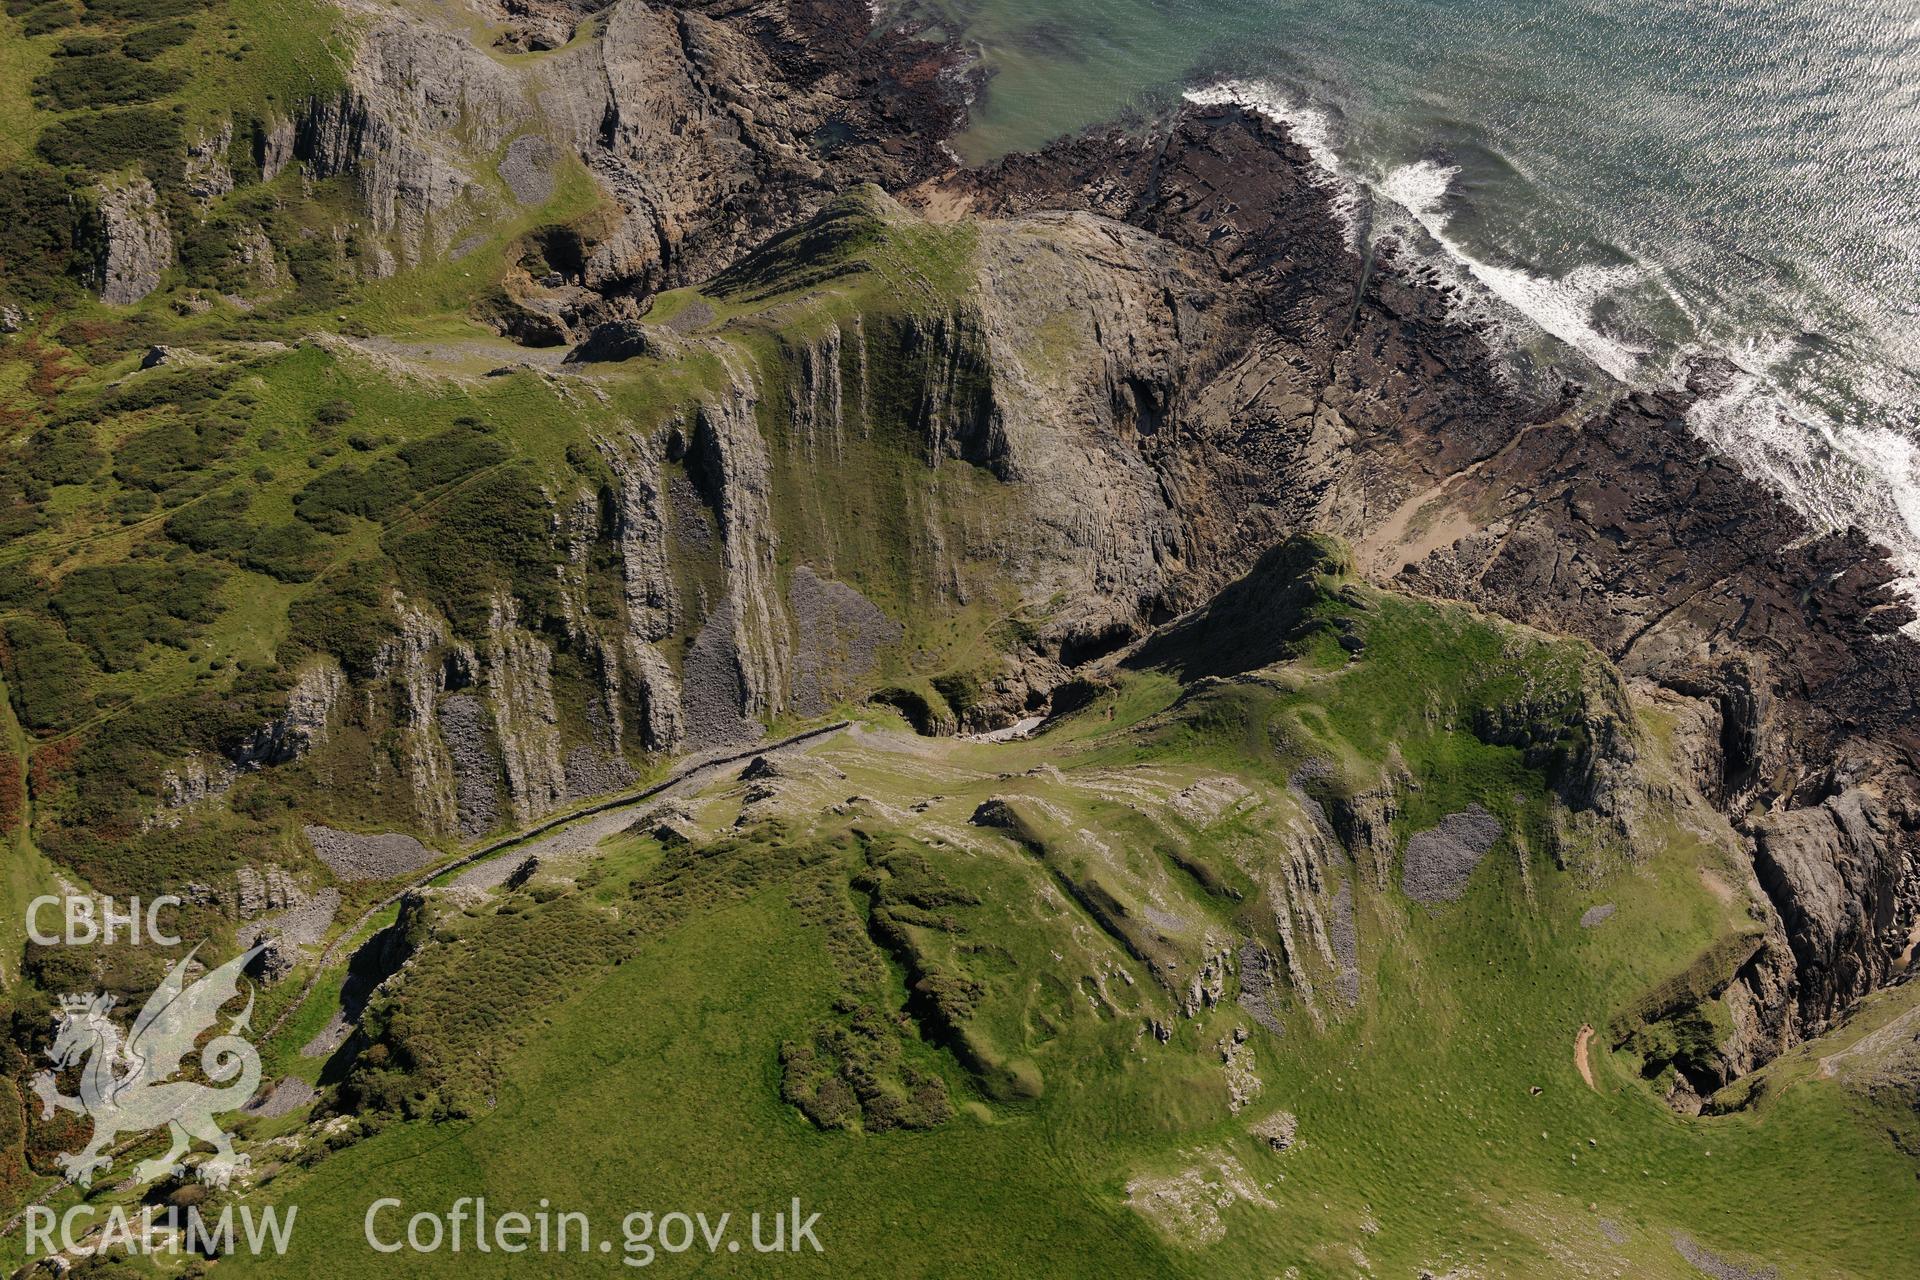 Yellow Top fort, on the south western shores of the Gower Peninsula. Oblique aerial photograph taken during the Royal Commission's programme of archaeological aerial reconnaissance by Toby Driver on 30th September 2015.